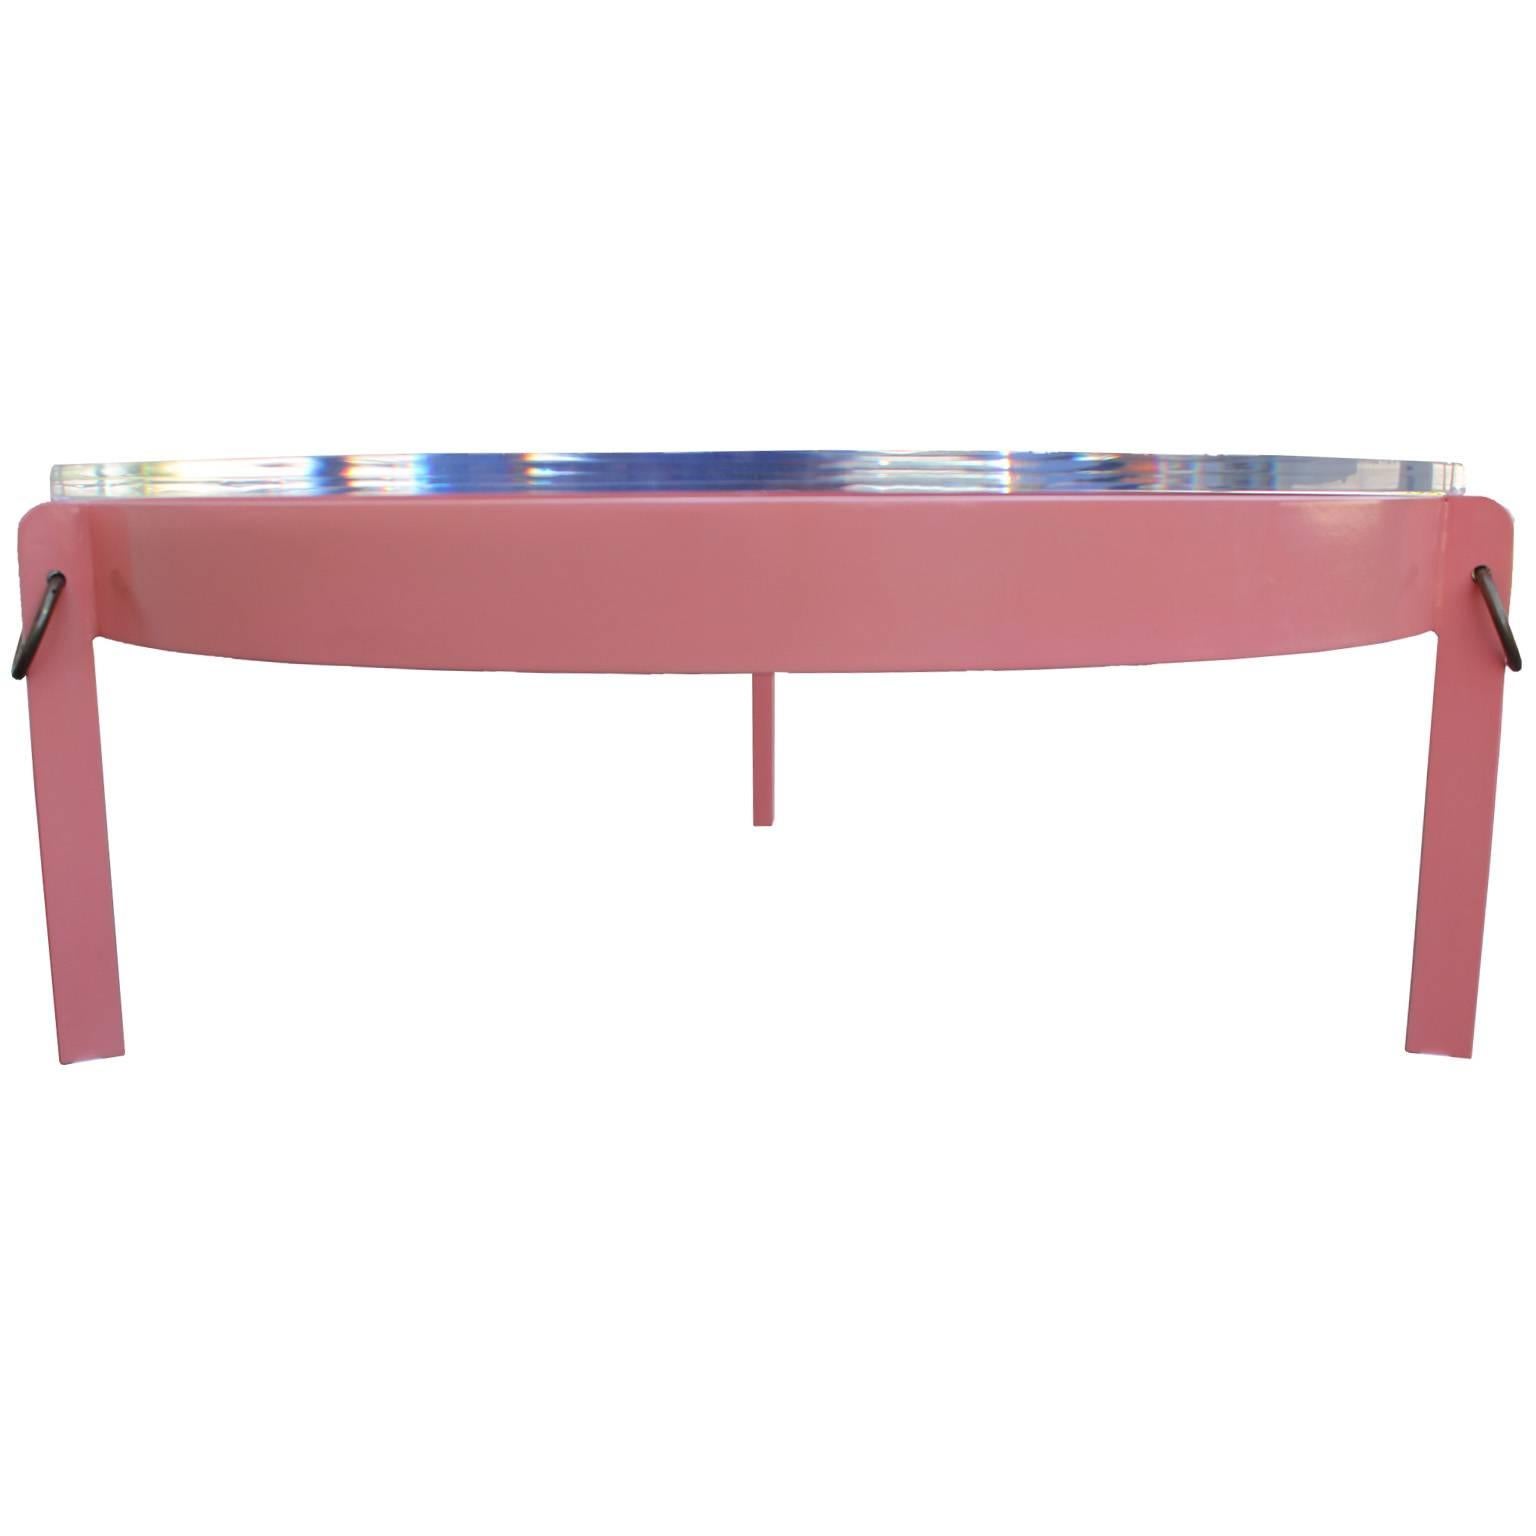 Glamorous round coffee table. Metal base is freshly Lacquered in a coral pink with brass ring accents. Topped with thick Lucite and brass rings. Table will look perfect in a Hollywood Regency, Mid-Century or modern space.